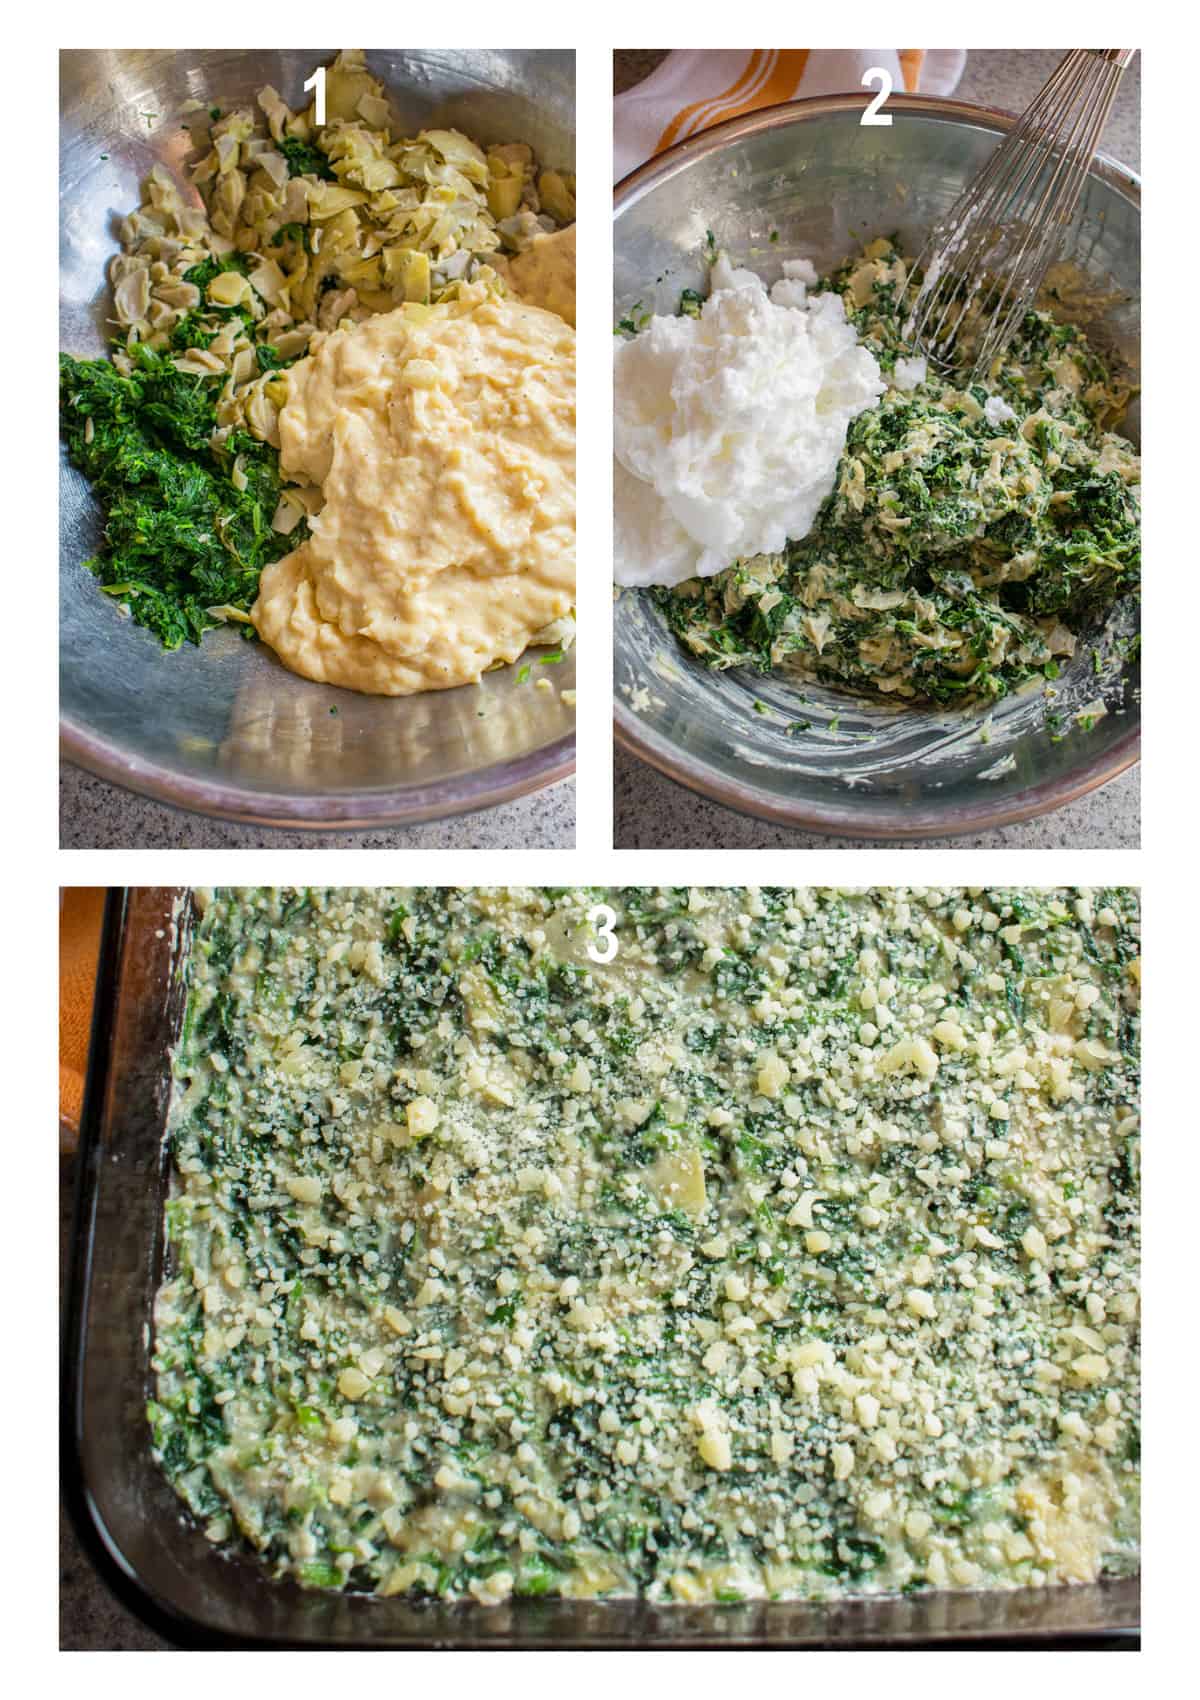 spinach, artichokes and cream sauce in bowl, beaten egg whites added, mixed casserole